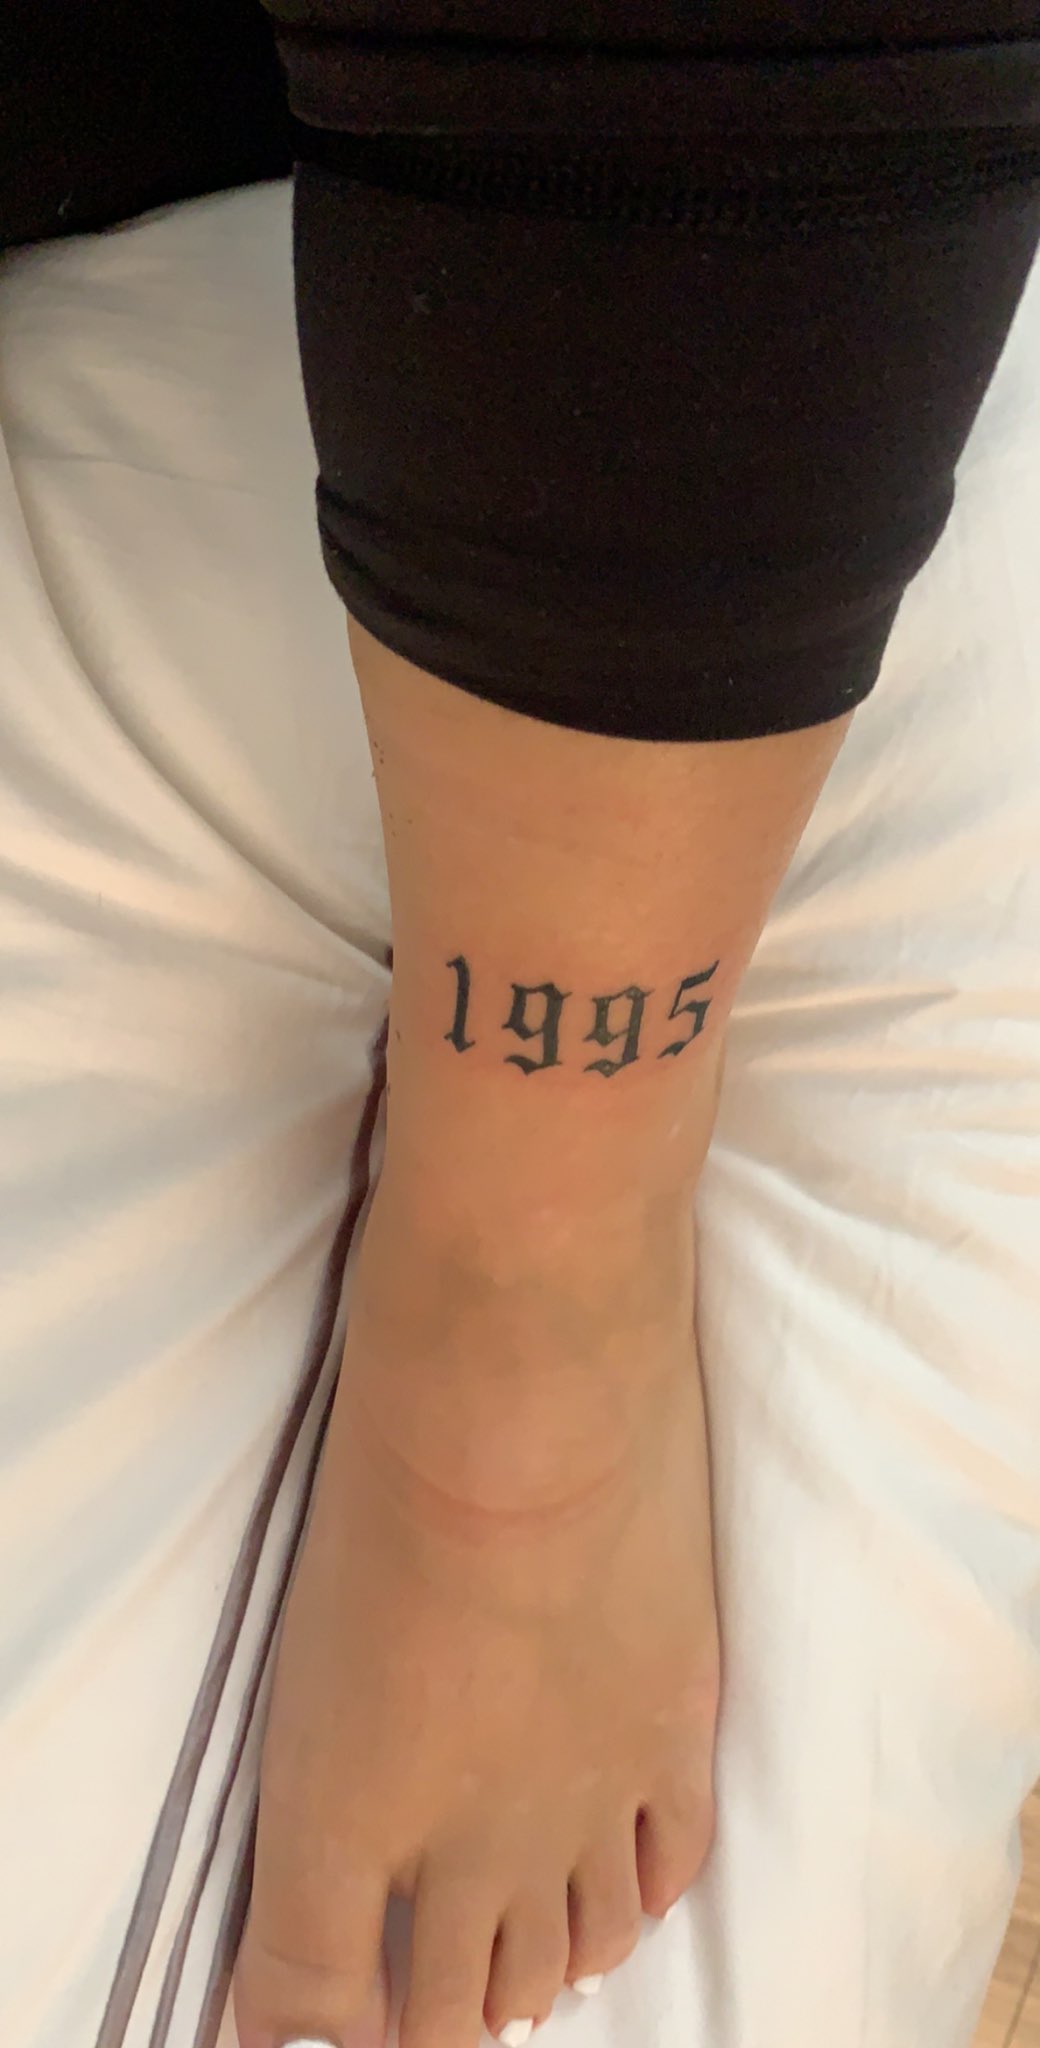 Buy 1991 Birth Year Temporary Tattoo set of 3 Online in India  Etsy